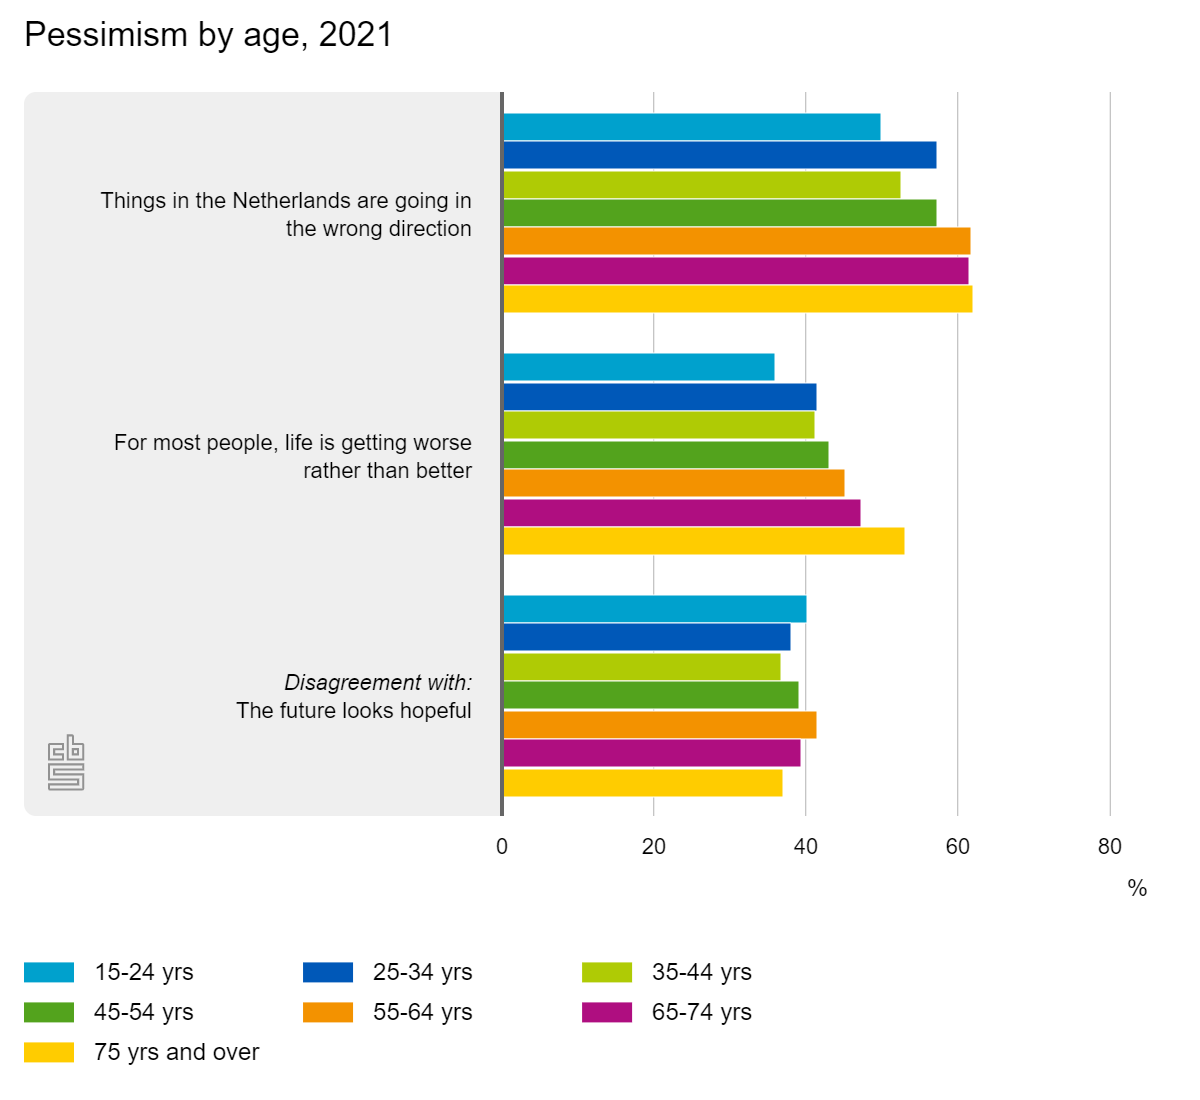 Pessimism grows with age